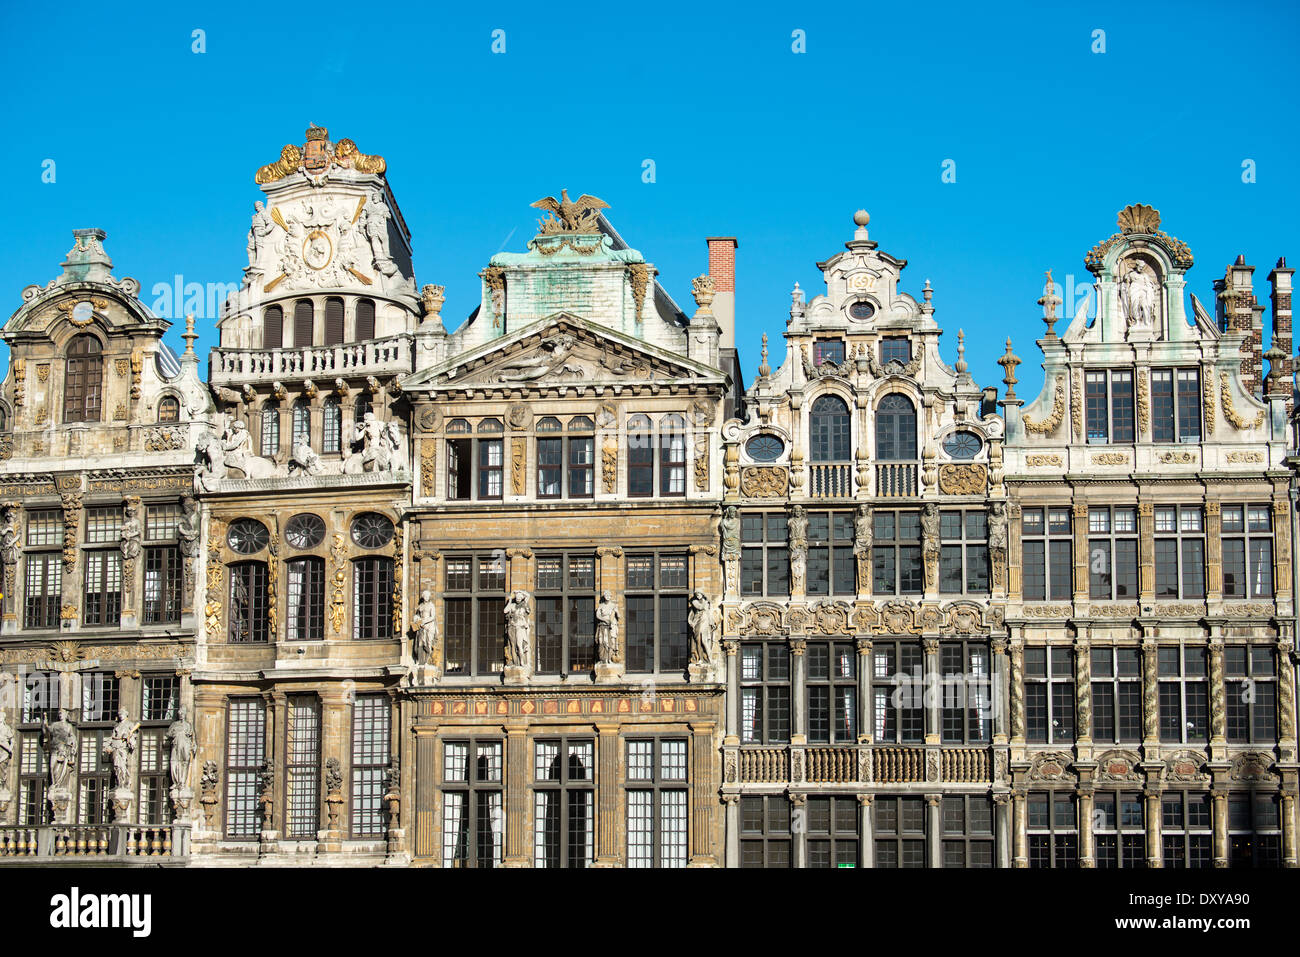 Historic guidhalls lining the northwest side of the Grand Place (La Grand-Place), a UNESCO World Heritage Site in central Brussels, Belgium. Lined with ornate, historic buildings, the cobblestone square is the primary tourist attraction in Brussels. Stock Photo